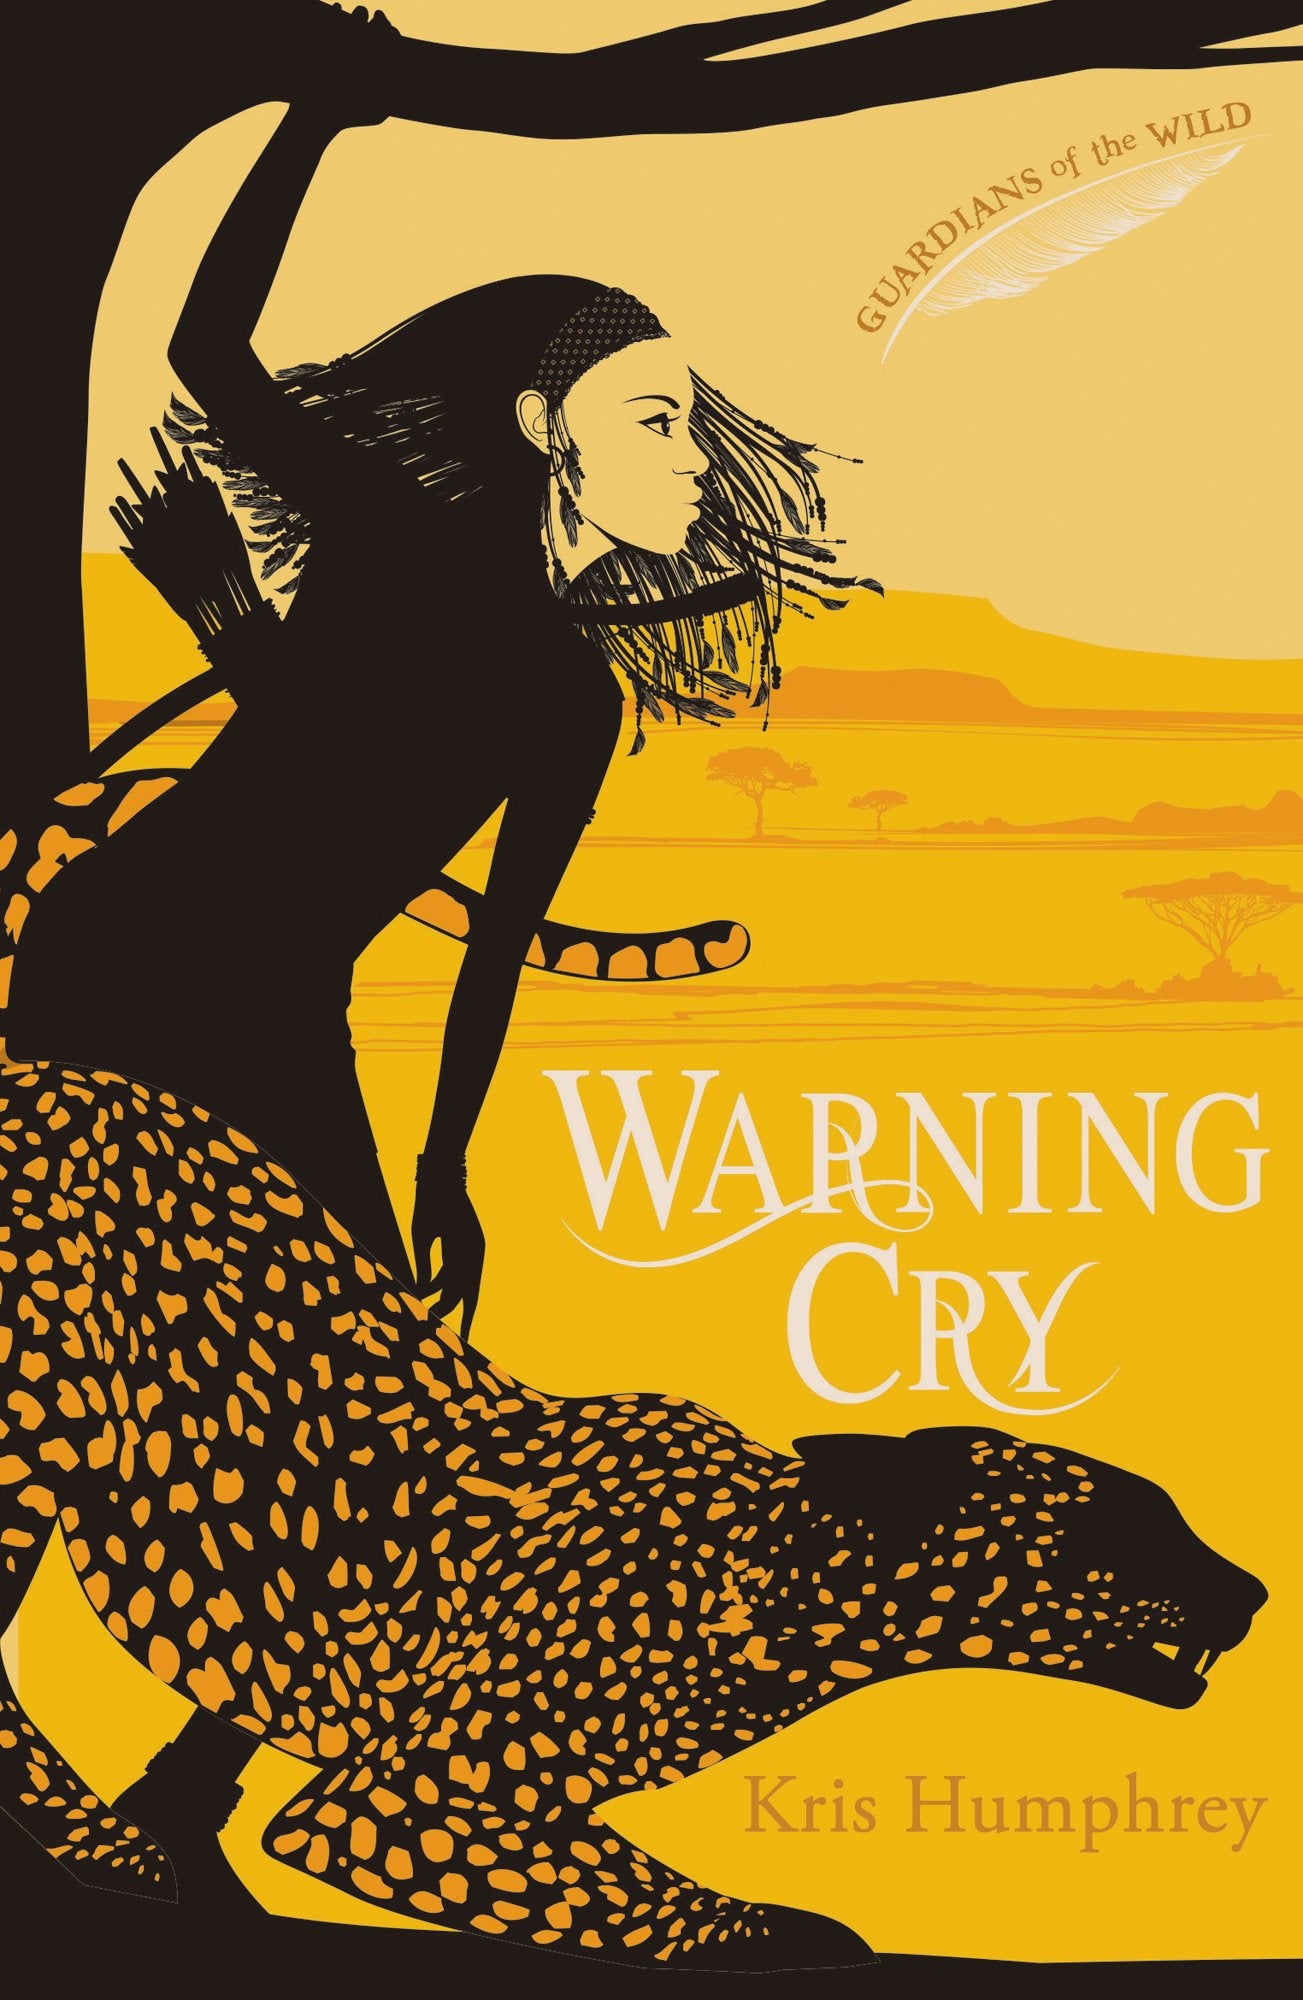 Warning Cry (Guardians of the Wild Book 2)